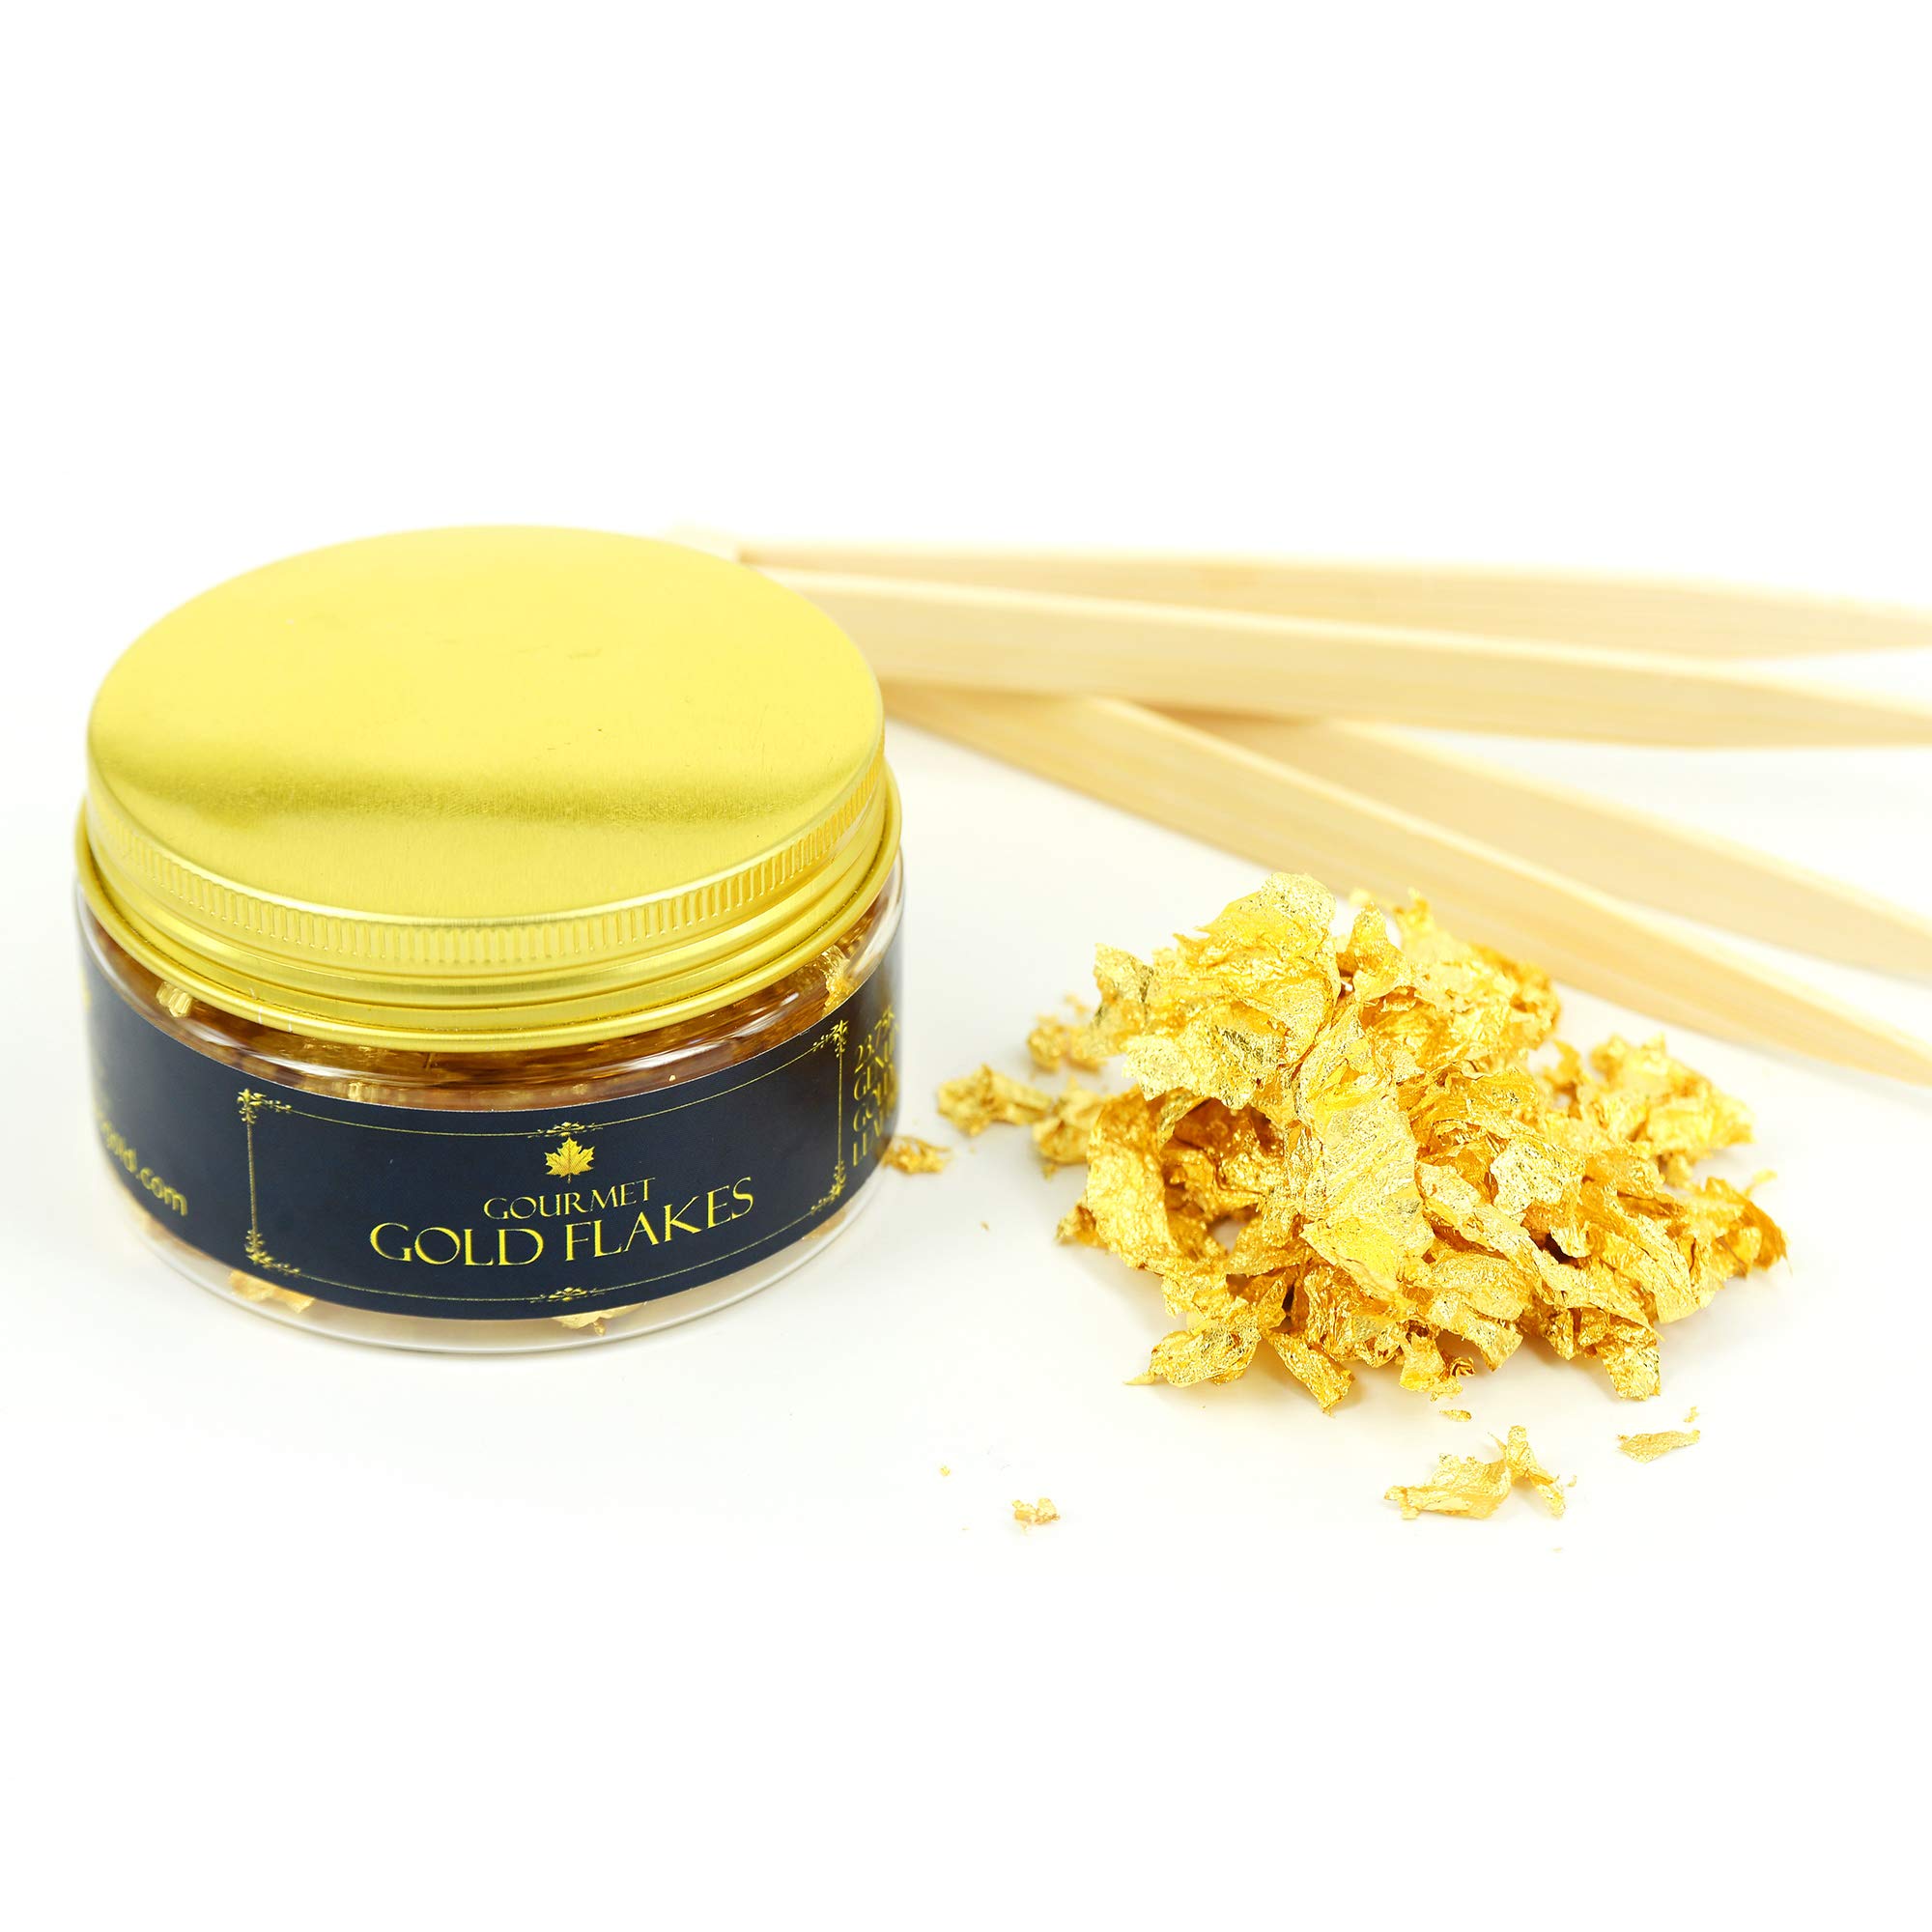 Edible gold leaf and edible gold flakes: order online here